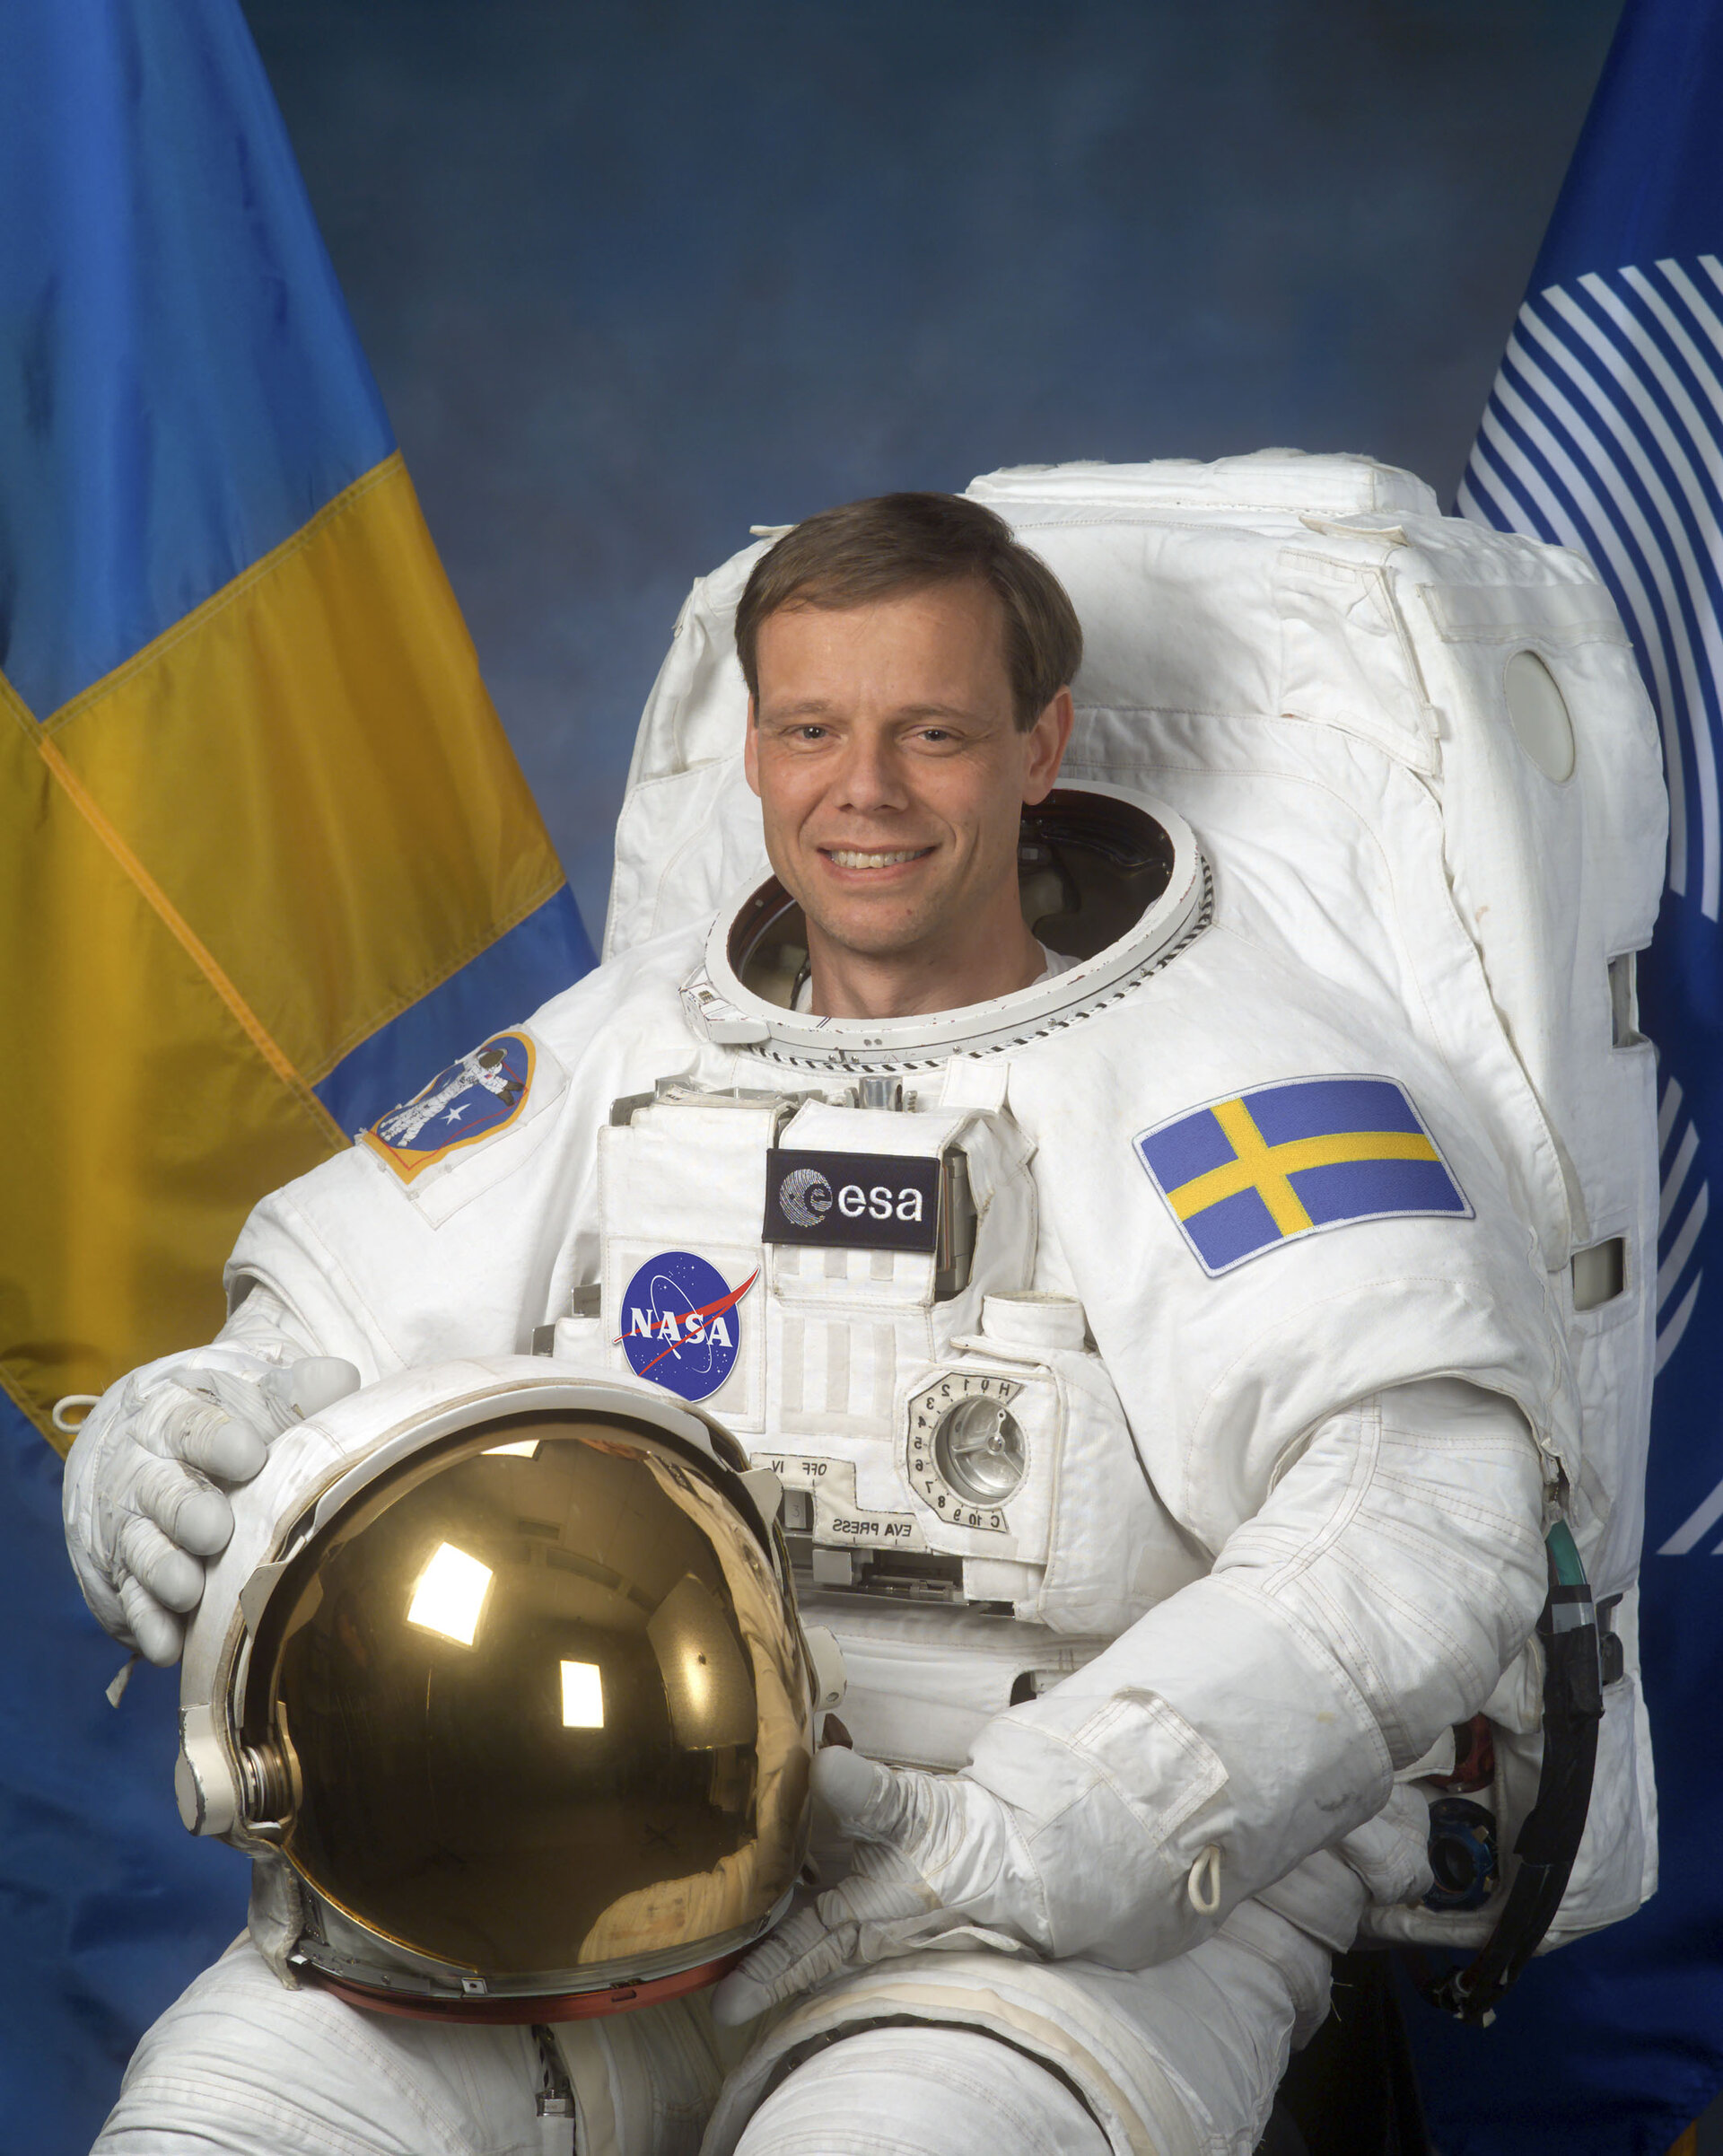 Fuglesang returns to Sweden for the first time since his mission to ISS between 9-22 December